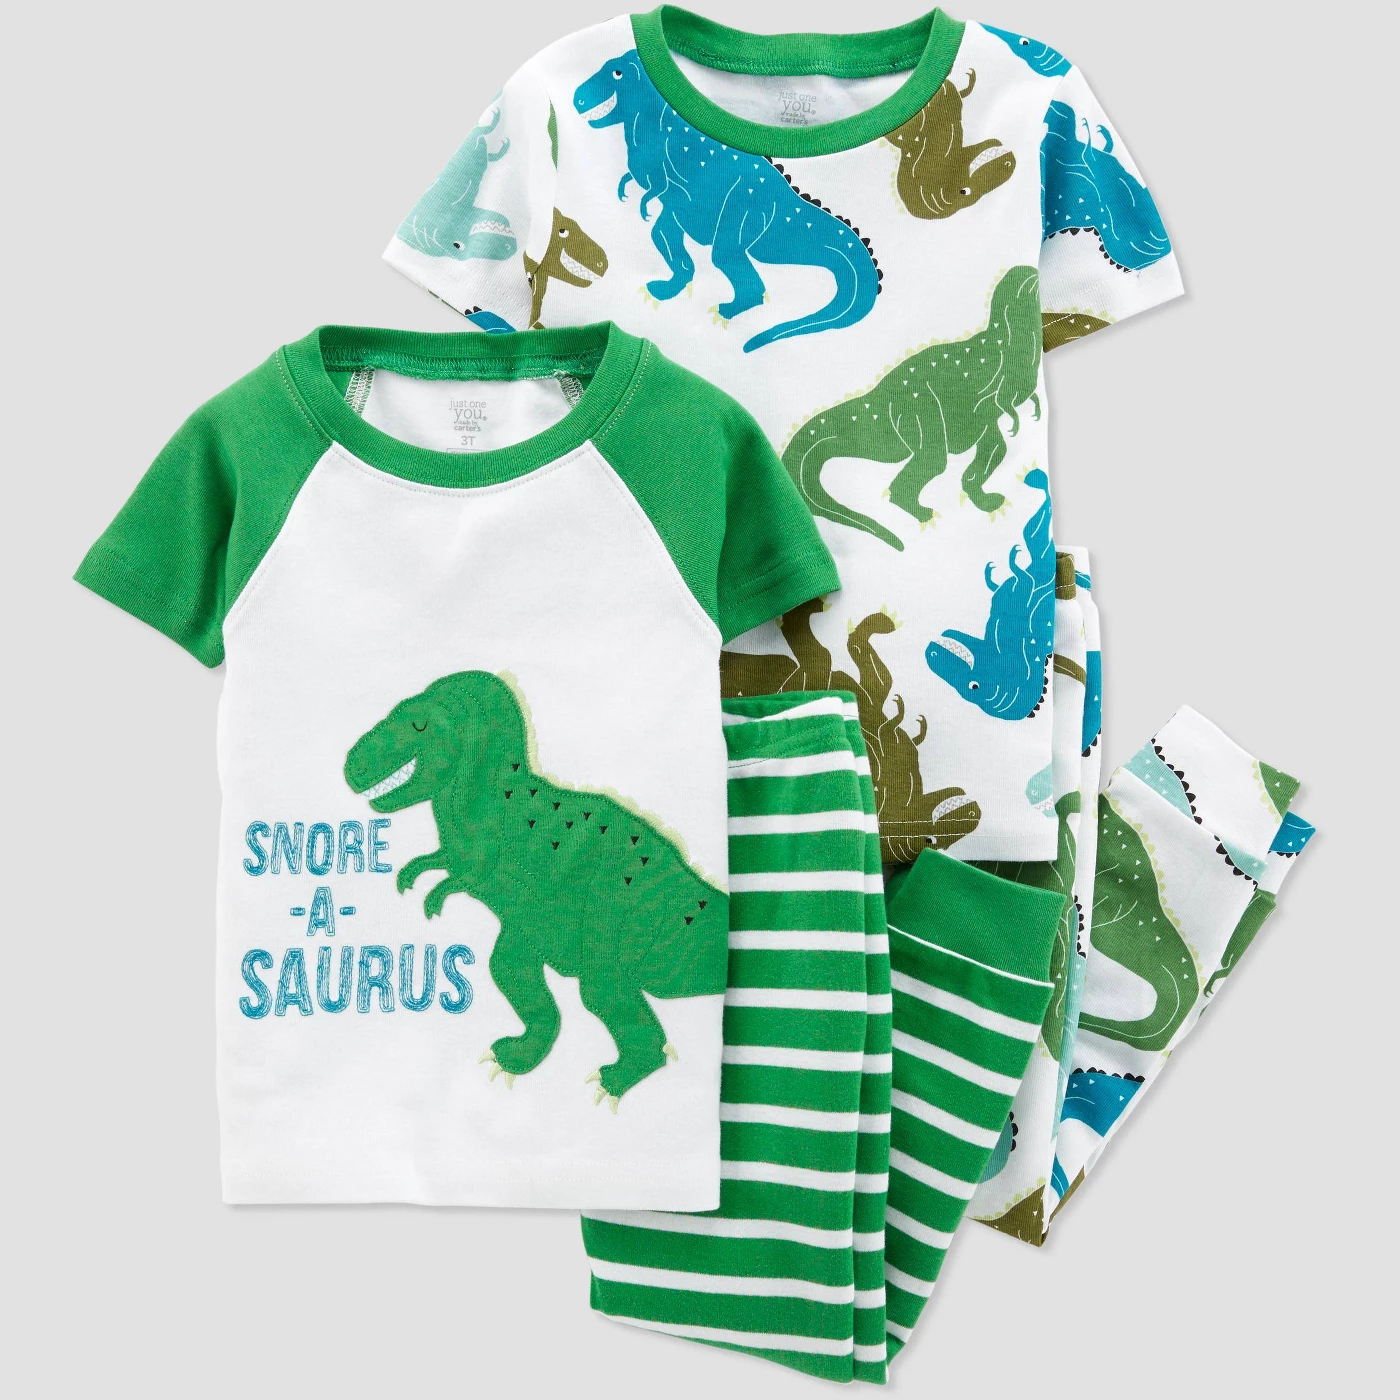 Toddler Boys' 4pc Dino Pajama Set - Just One YouÂ® made by carter's Green/White - image 1 of 1